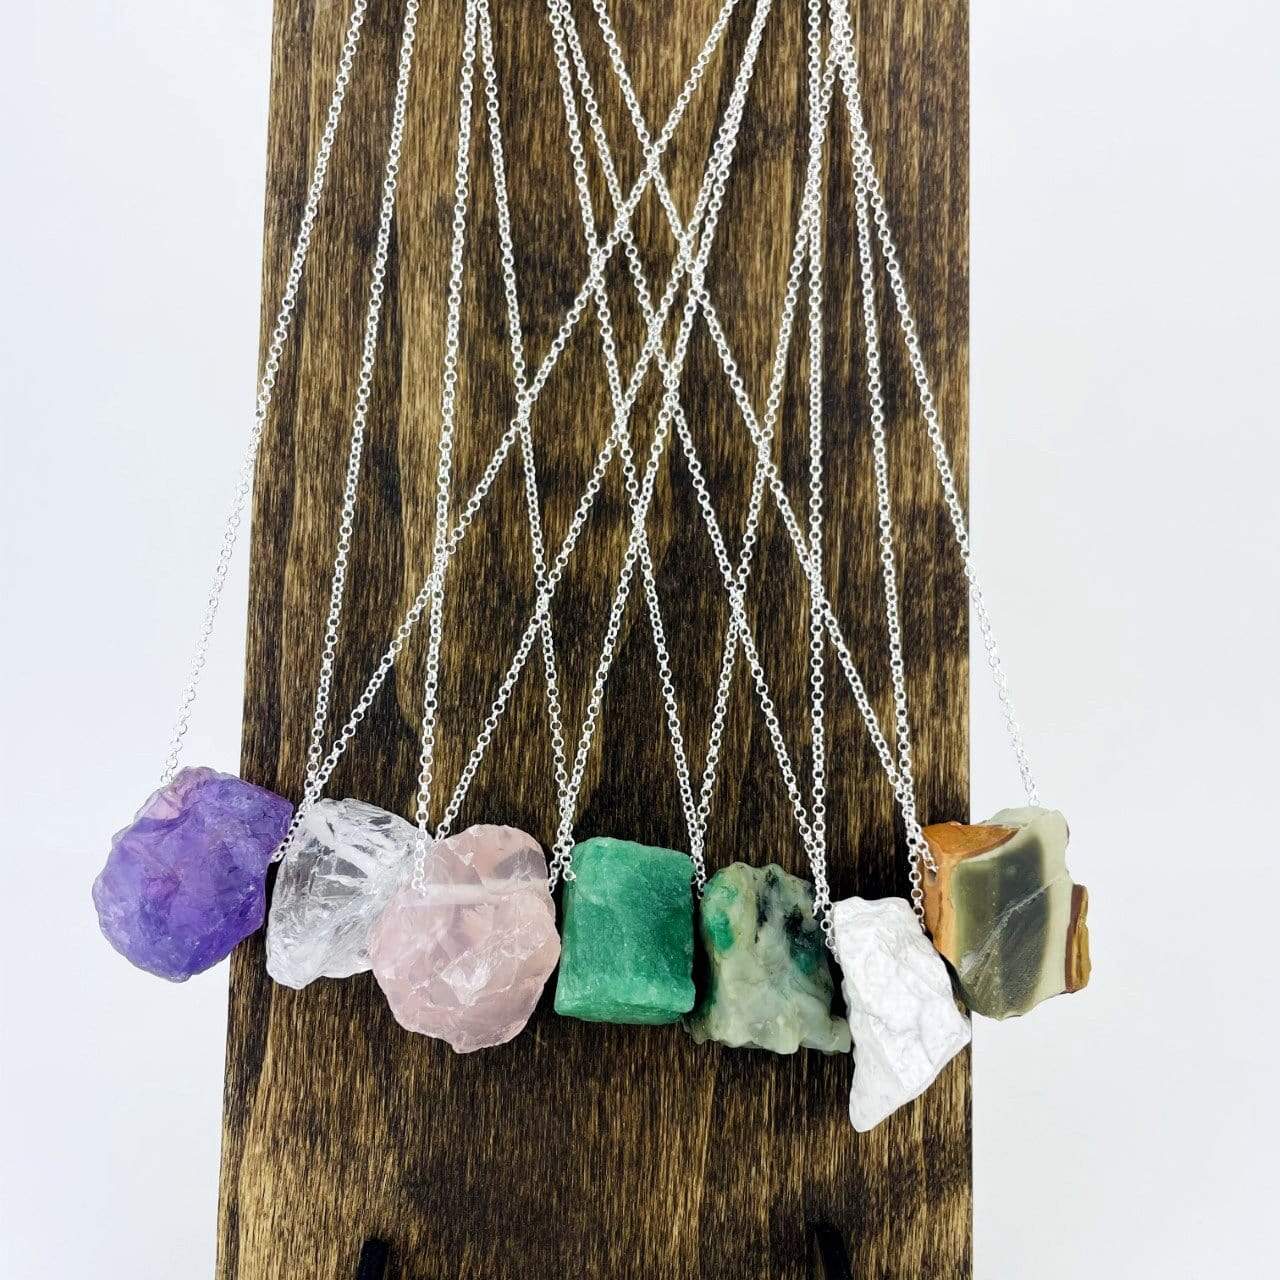 Healing Stone Necklaces with silver chain on stand